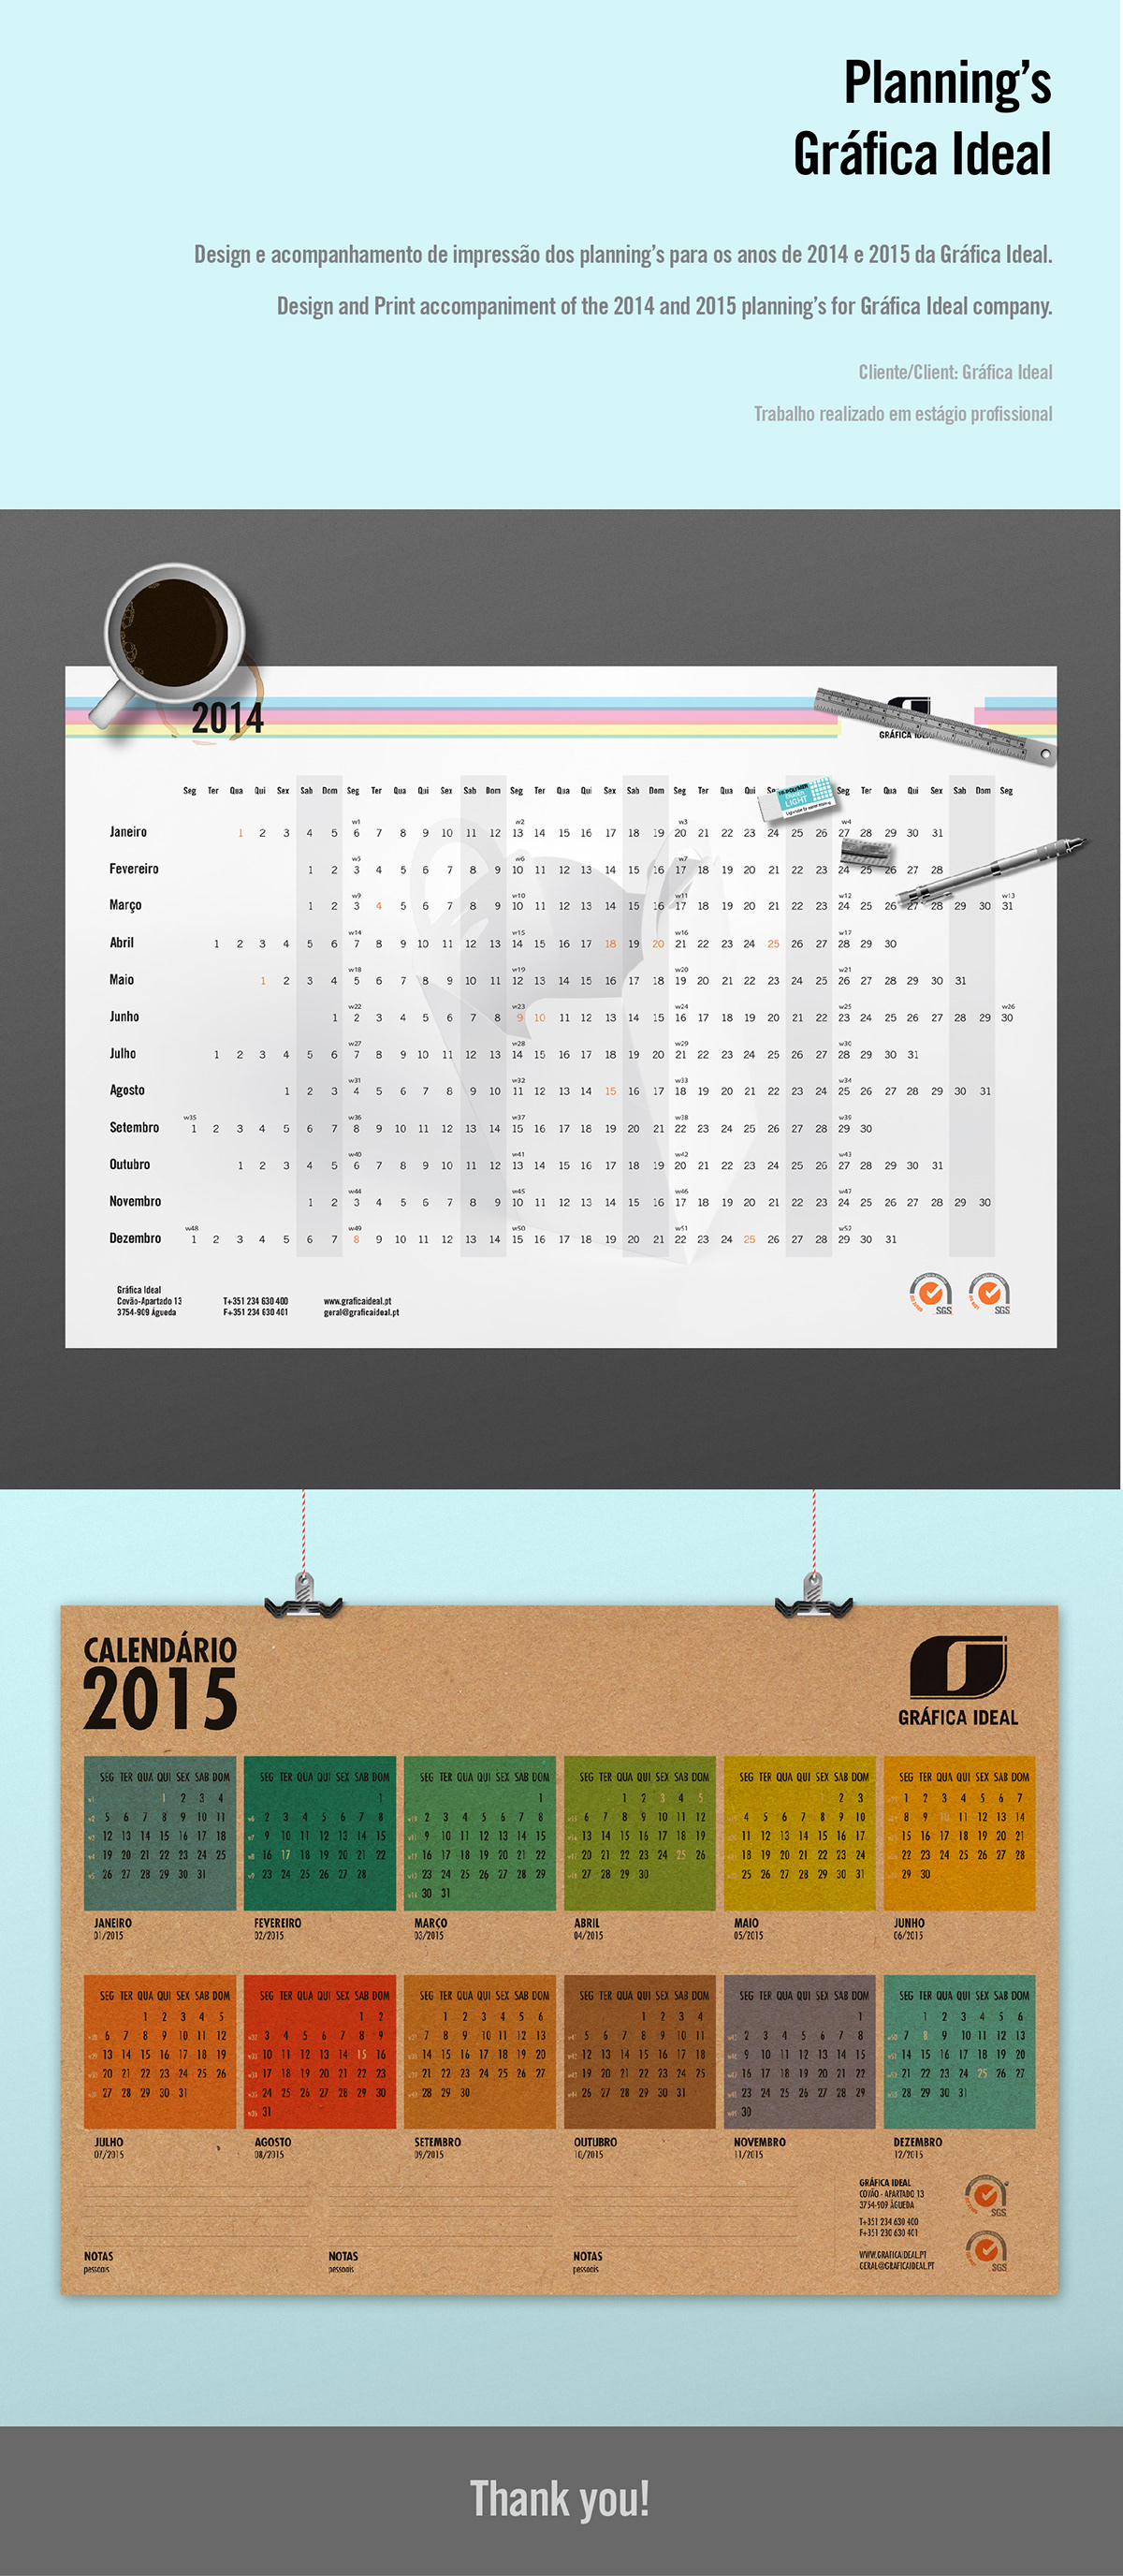 Plannning year 2014 year 2015 calendar Gráfica Ideal packaging company